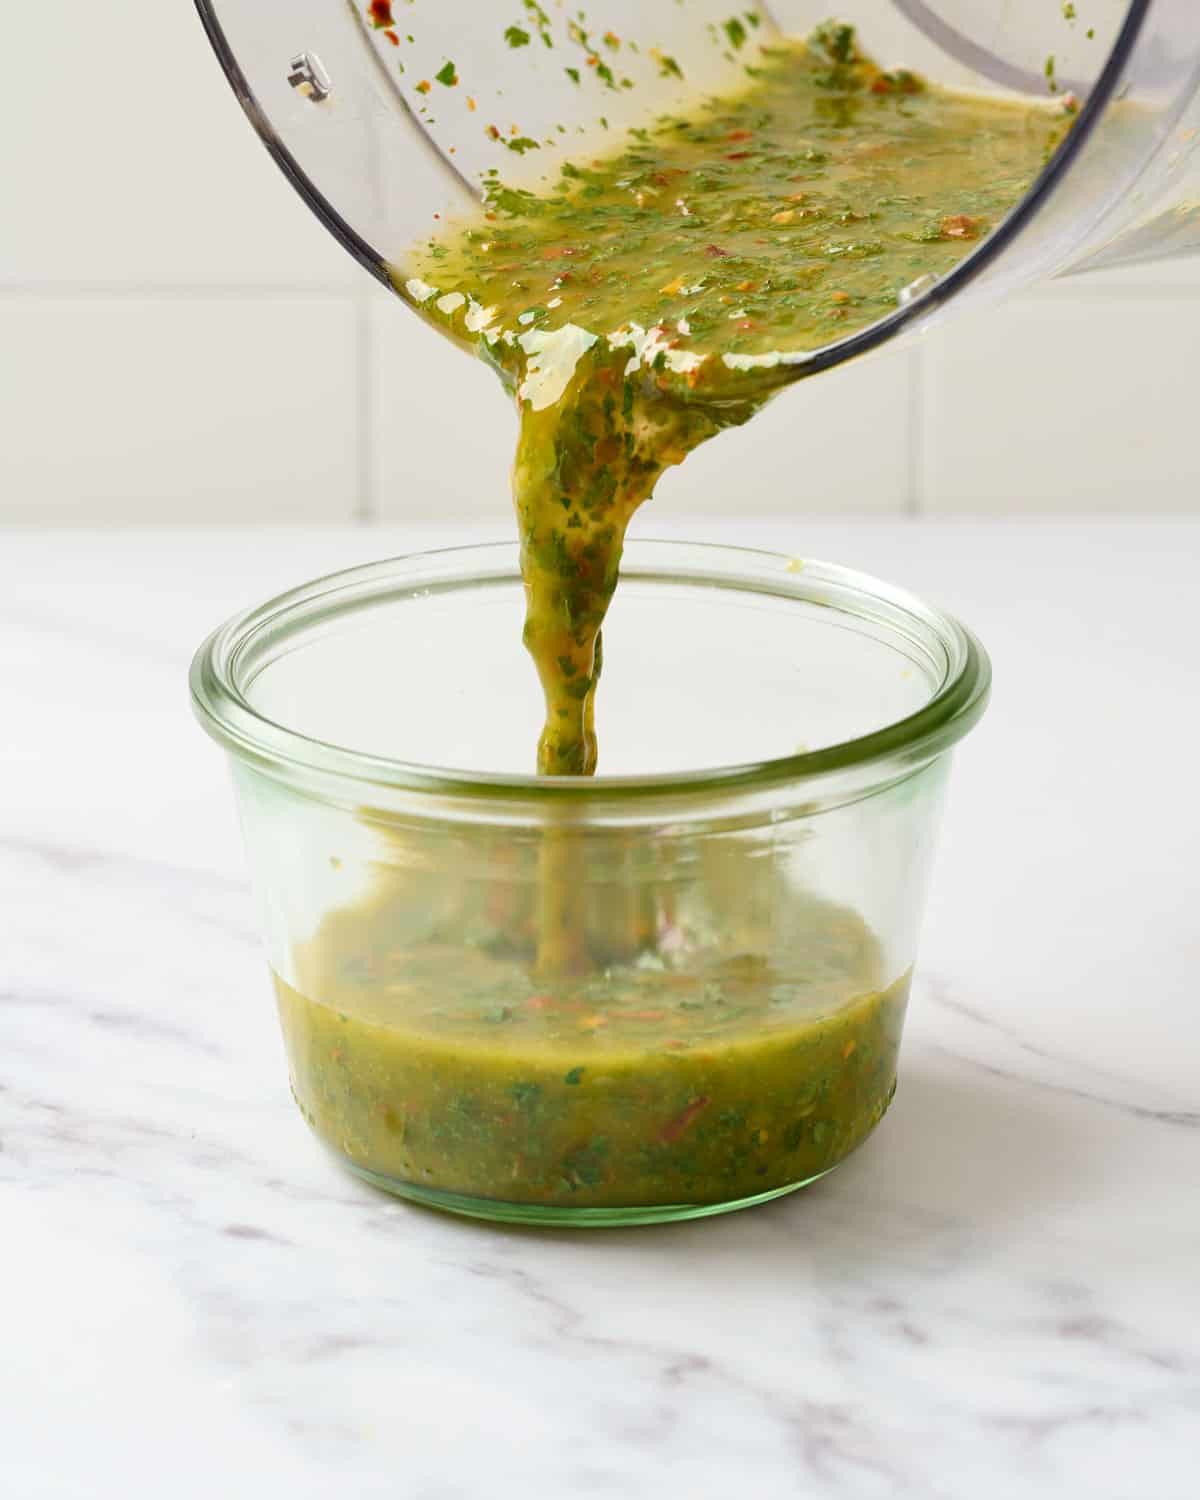 Pouring spicy chimichurri into airtight container.